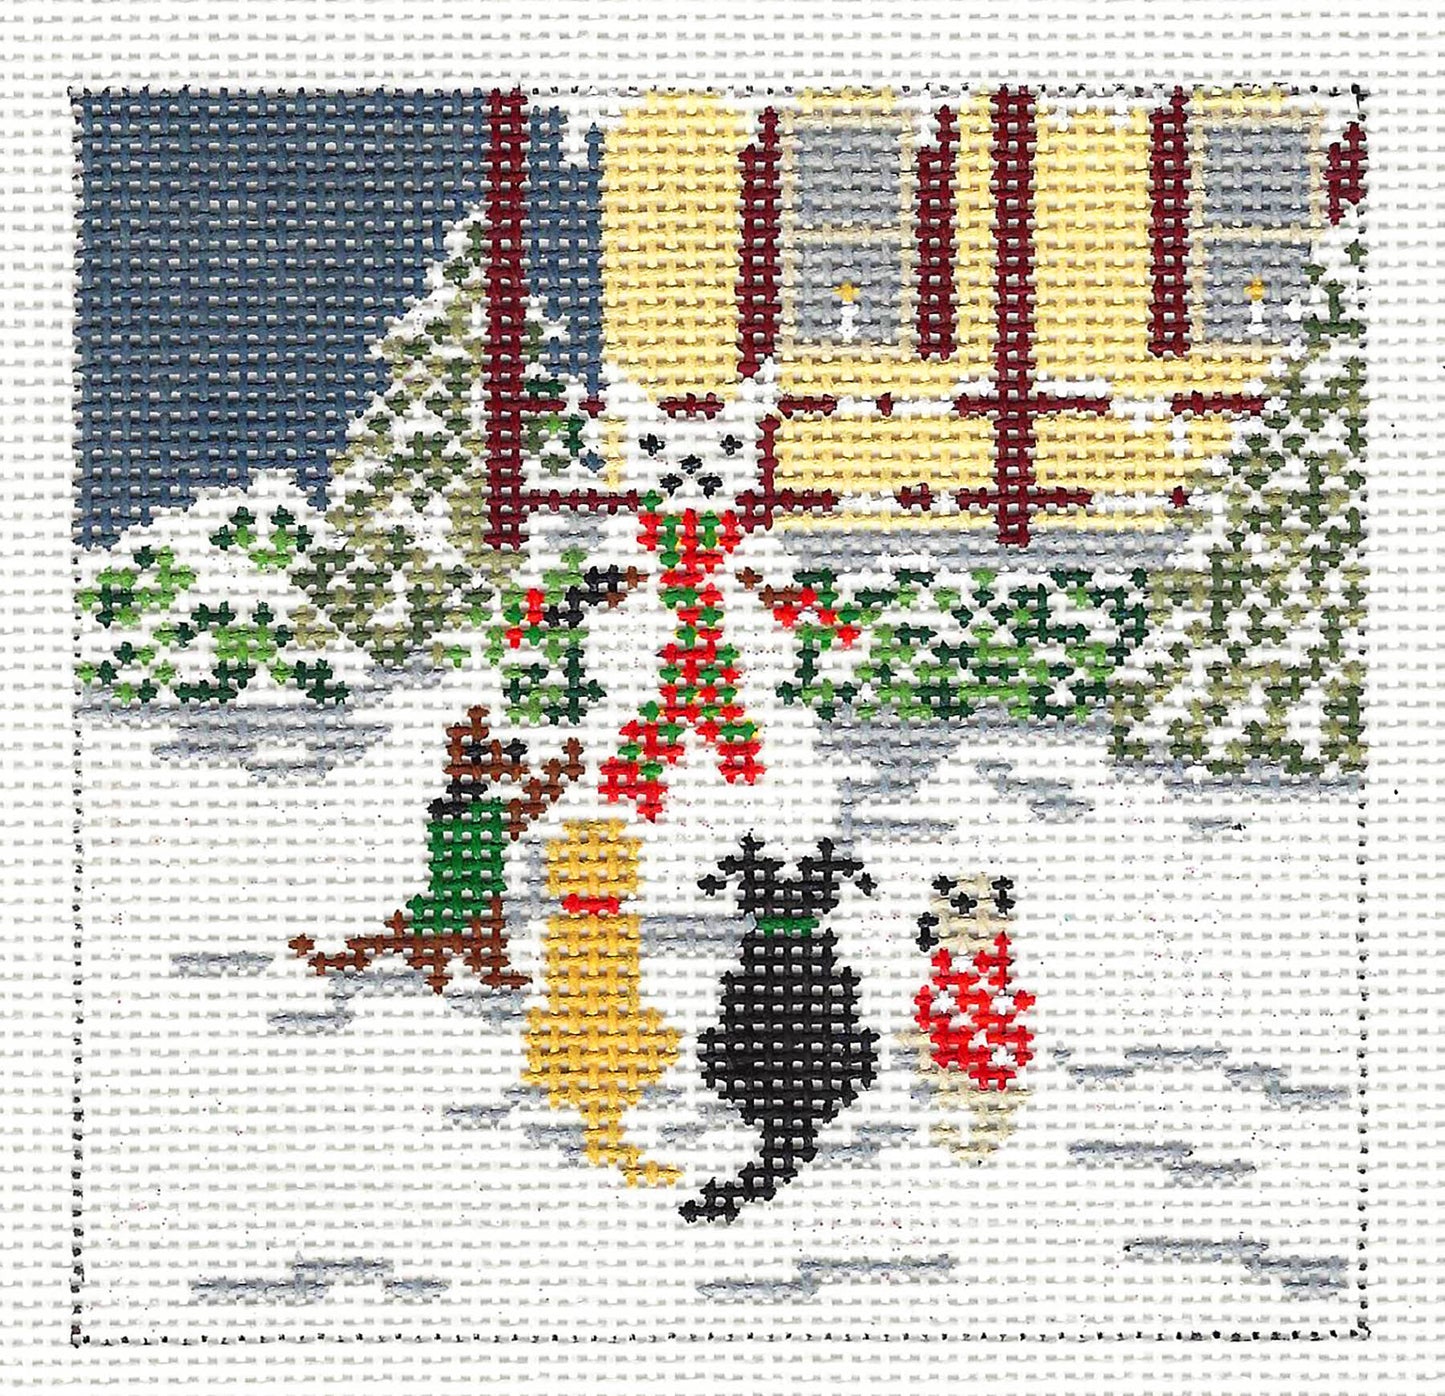 Dog Canvas ~ 4 Snow Dogs Building a Snowman  3.75" Square handpainted Needlepoint Canvas by Needle Crossings